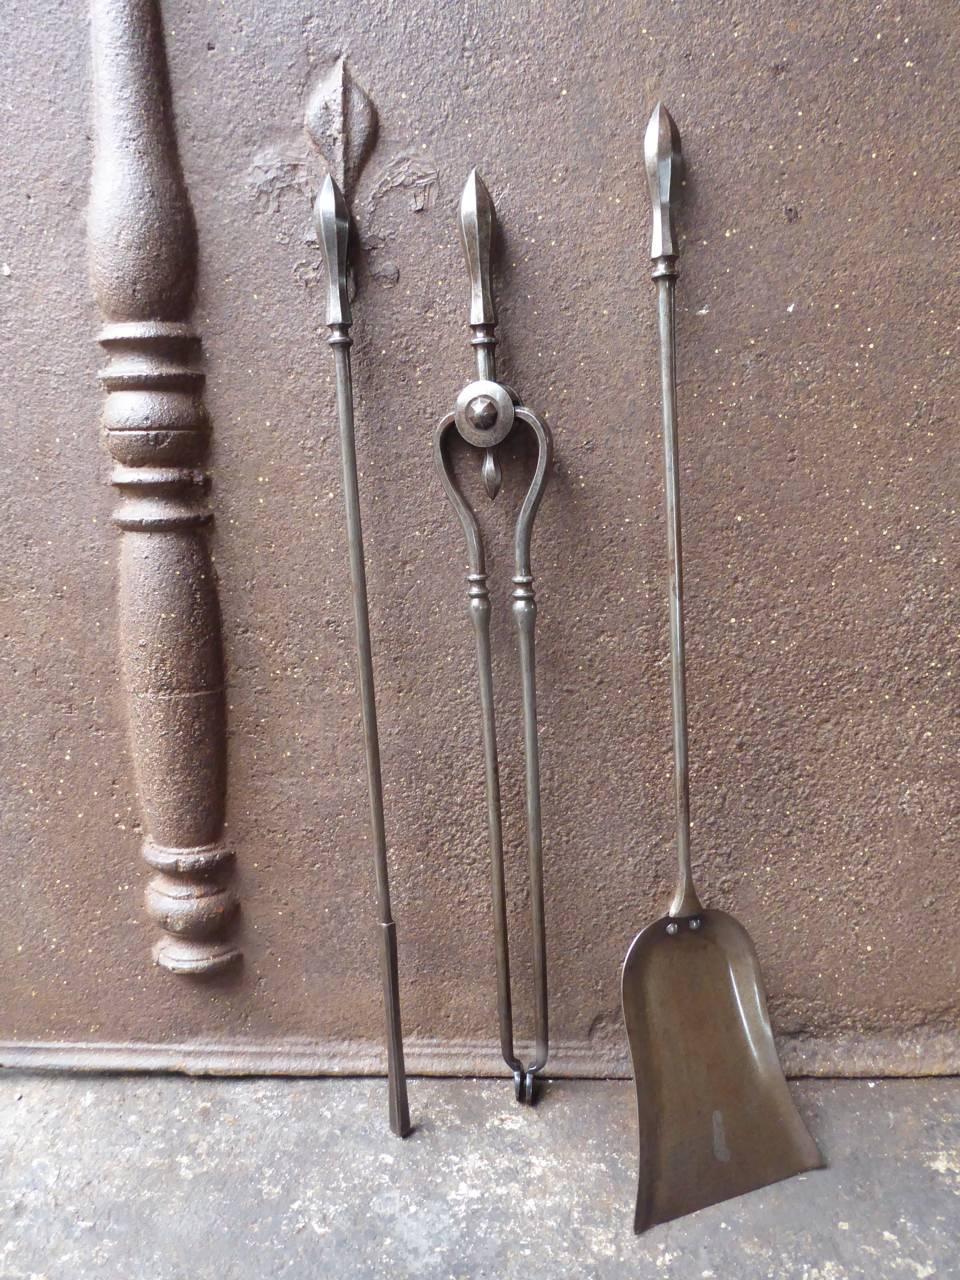 19th century English Victorian fireplace tool set - fire irons made of wrought iron.

We have a unique and specialized collection of antique and used fireplace accessories consisting of more than 1000 listings at 1stdibs. Amongst others, we always